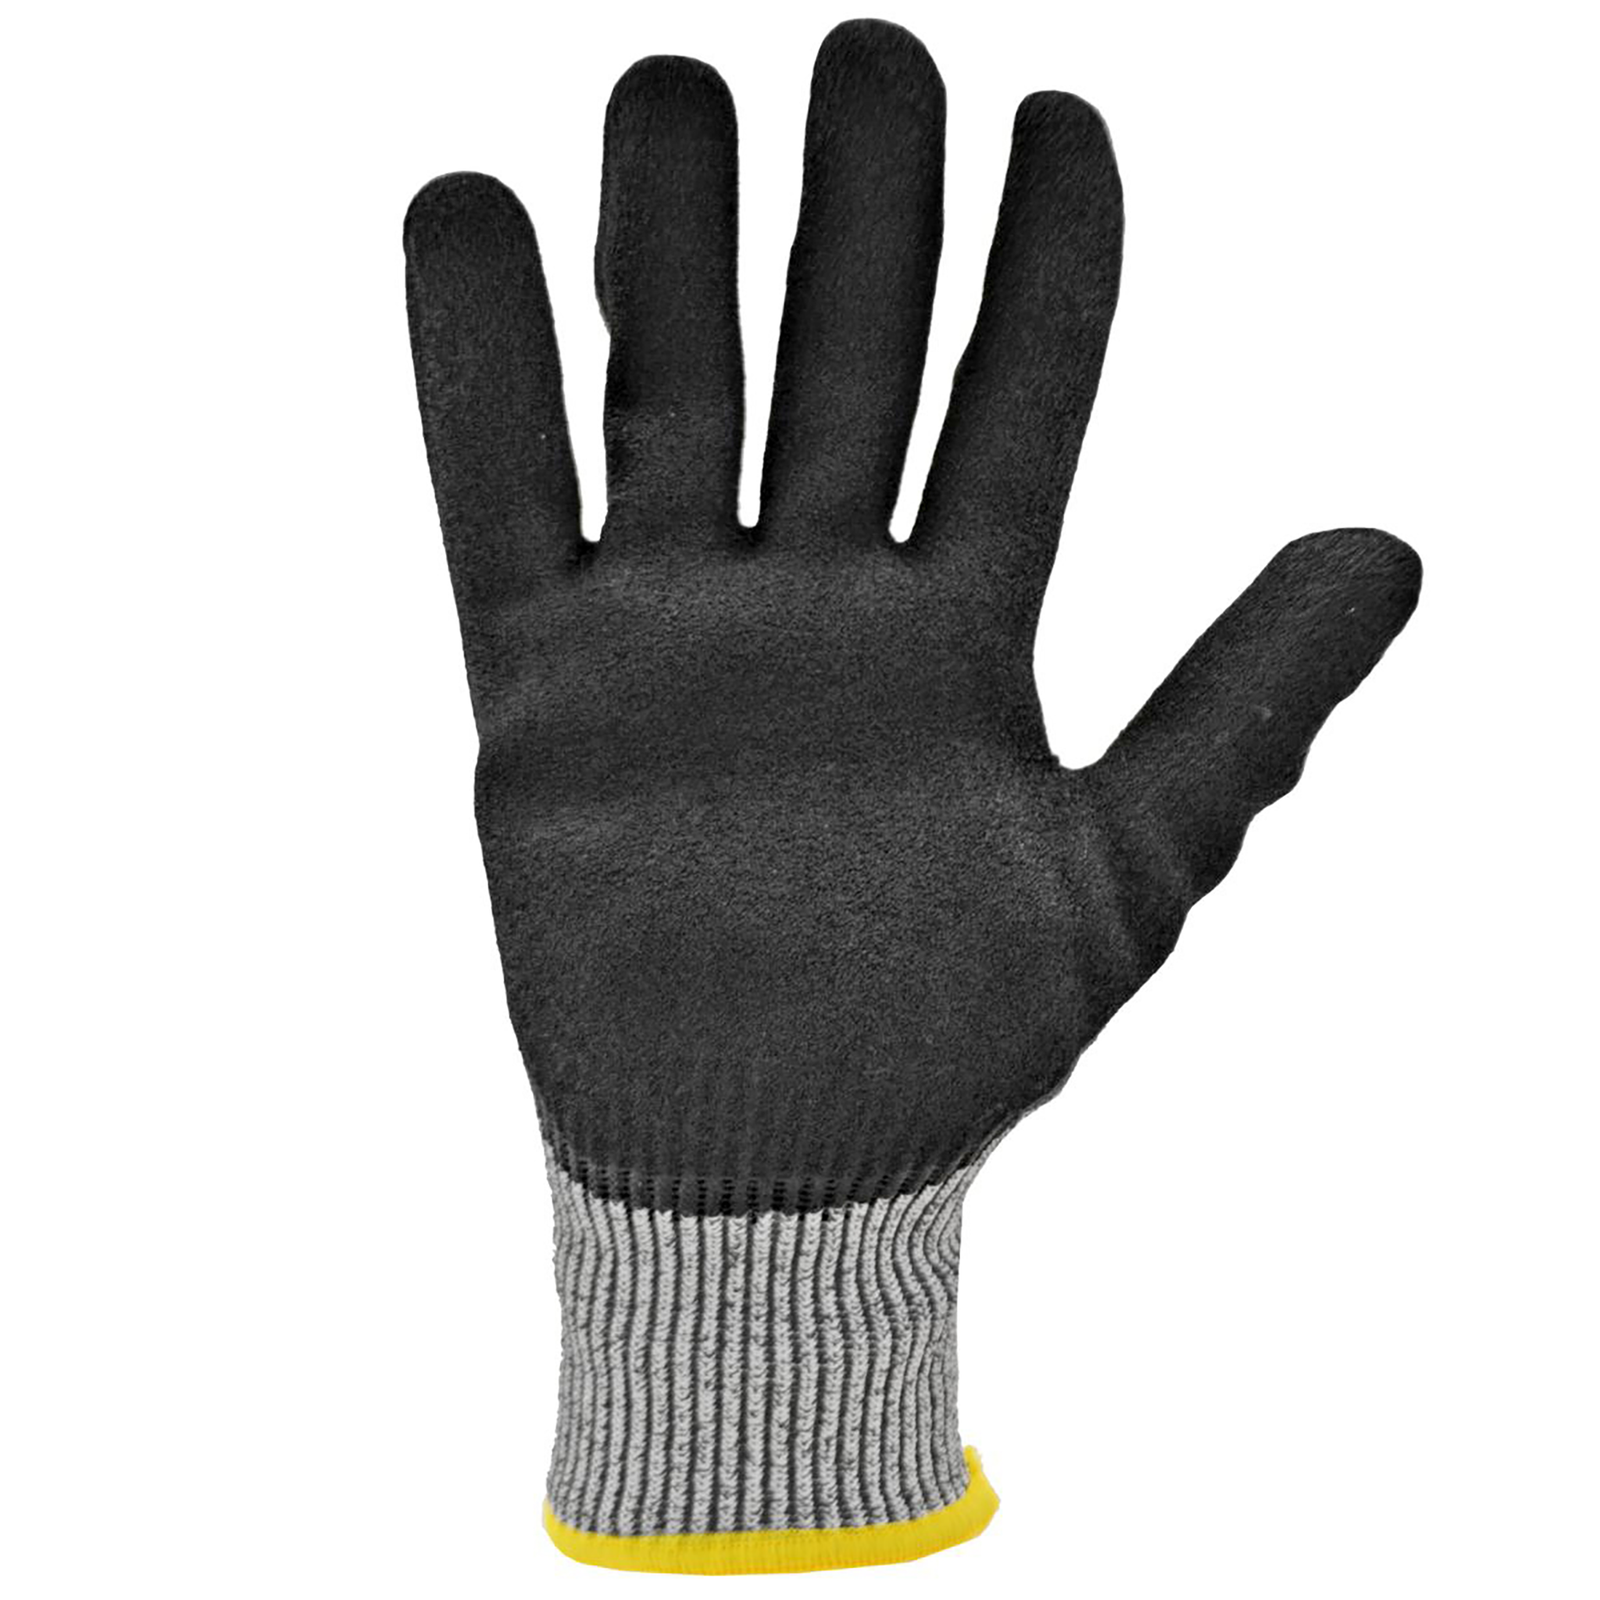 JORESTECH Palm Dipped Polyurethane Coated Seamless Knit Work Gloves PPE Hand Protection (Large) Pack of 12,Black